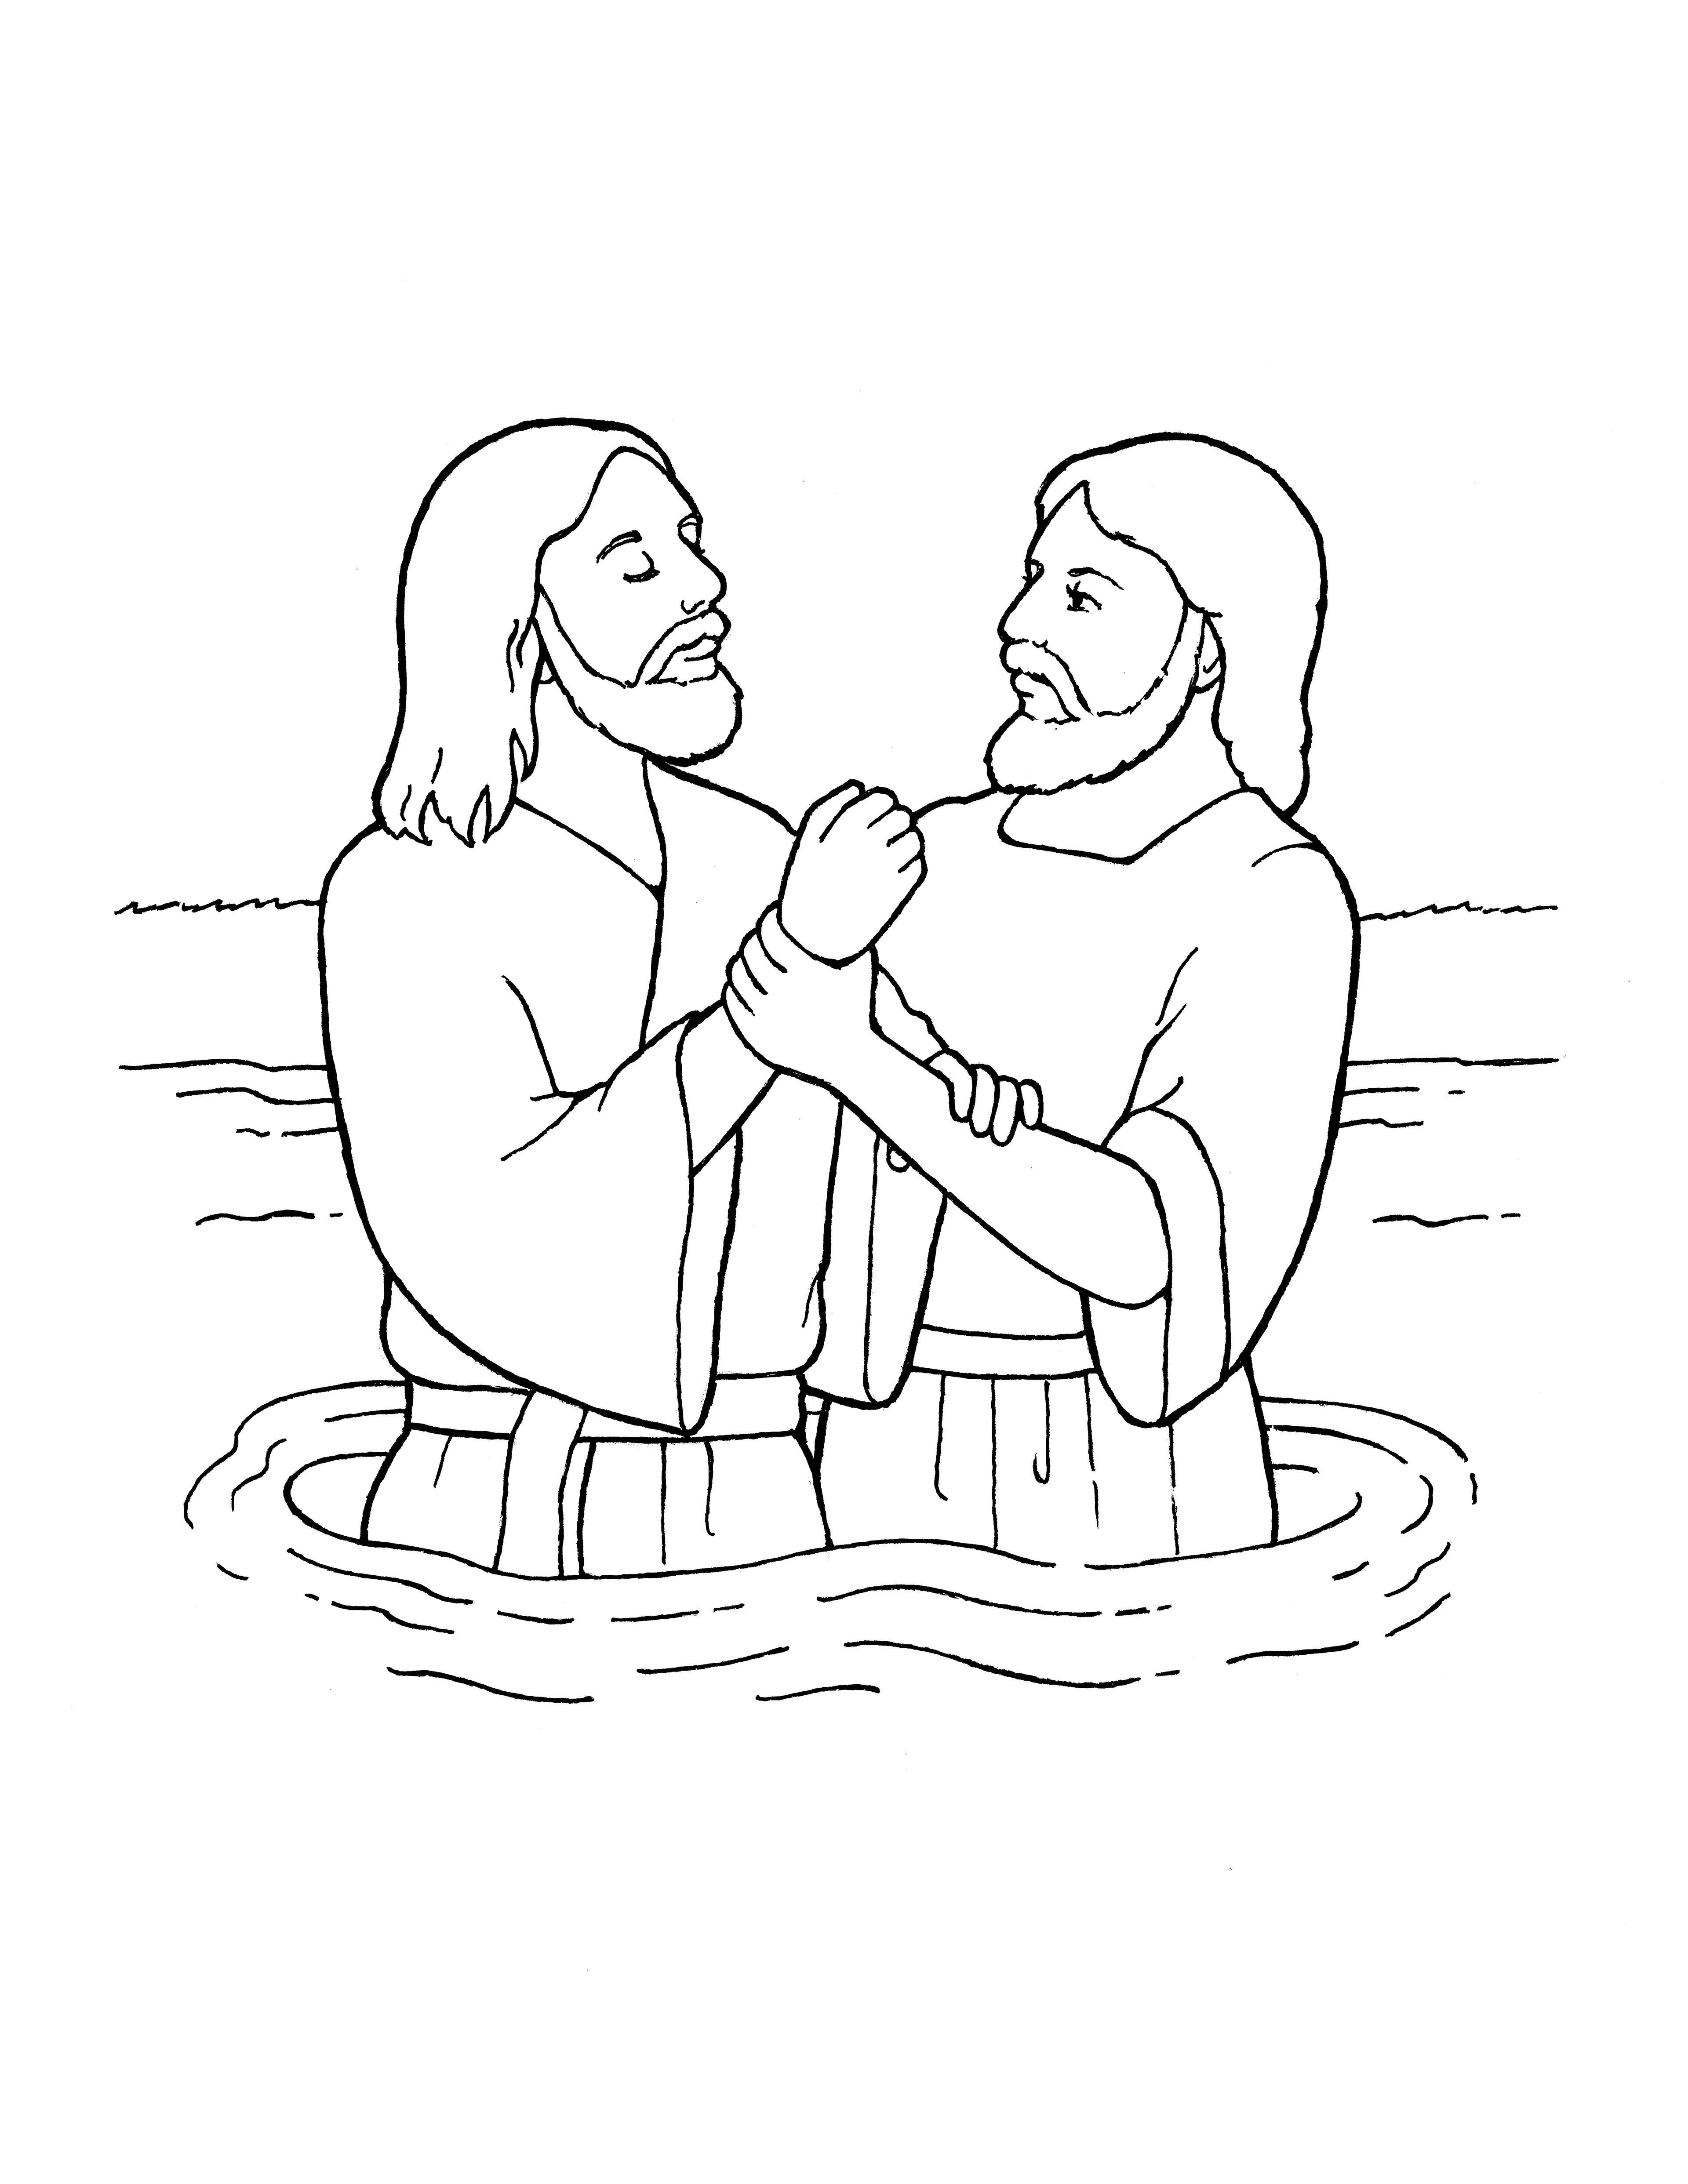 An illustration of John the Baptist baptizing Jesus Christ, from the nursery manual Behold Your Little Ones (2008), page 103.